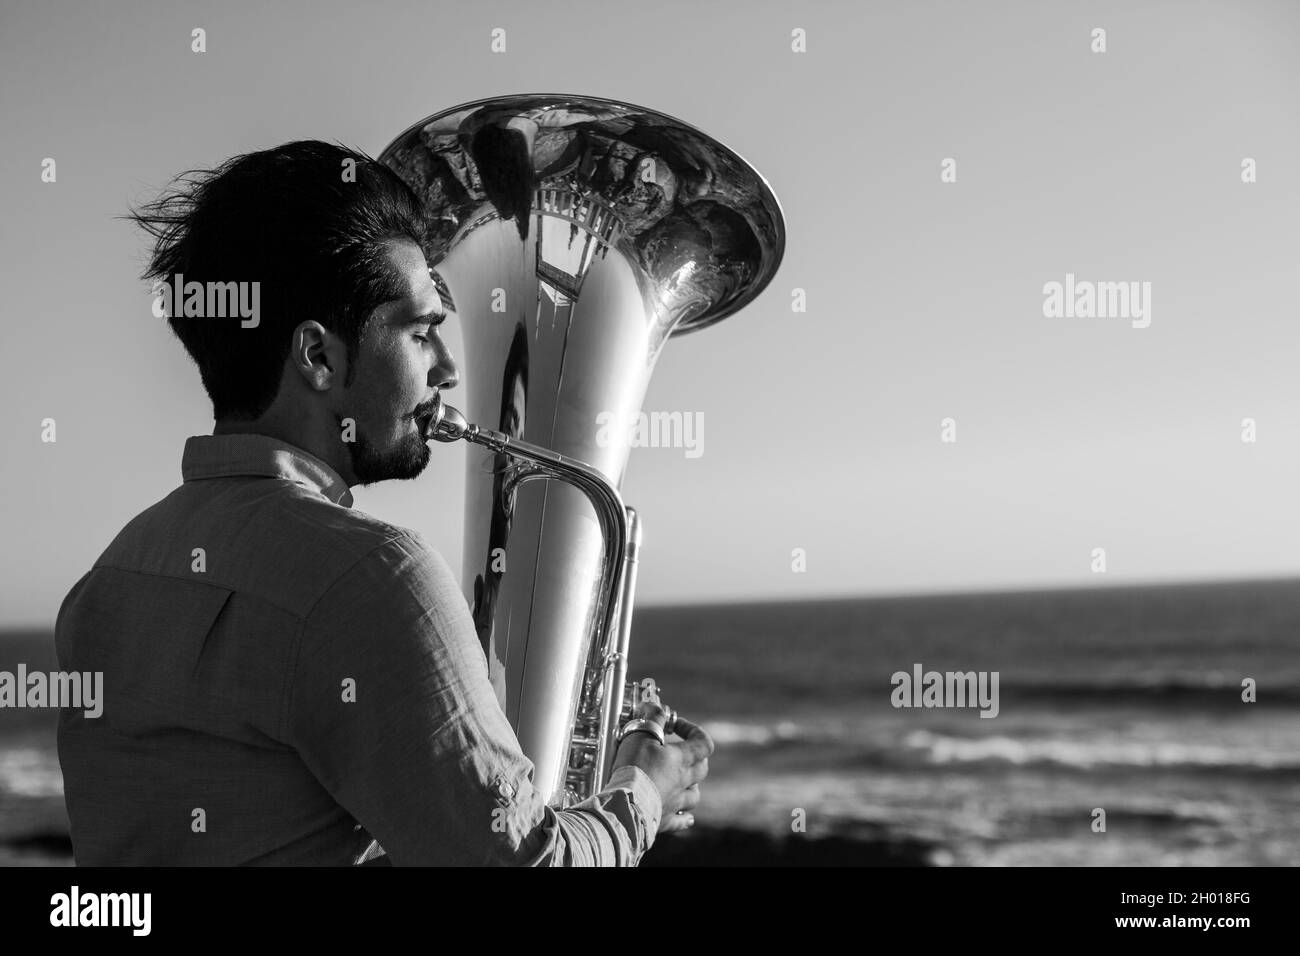 A musician man with a tuba on the Miramar beach, Portugal. Black and white photo. Stock Photo